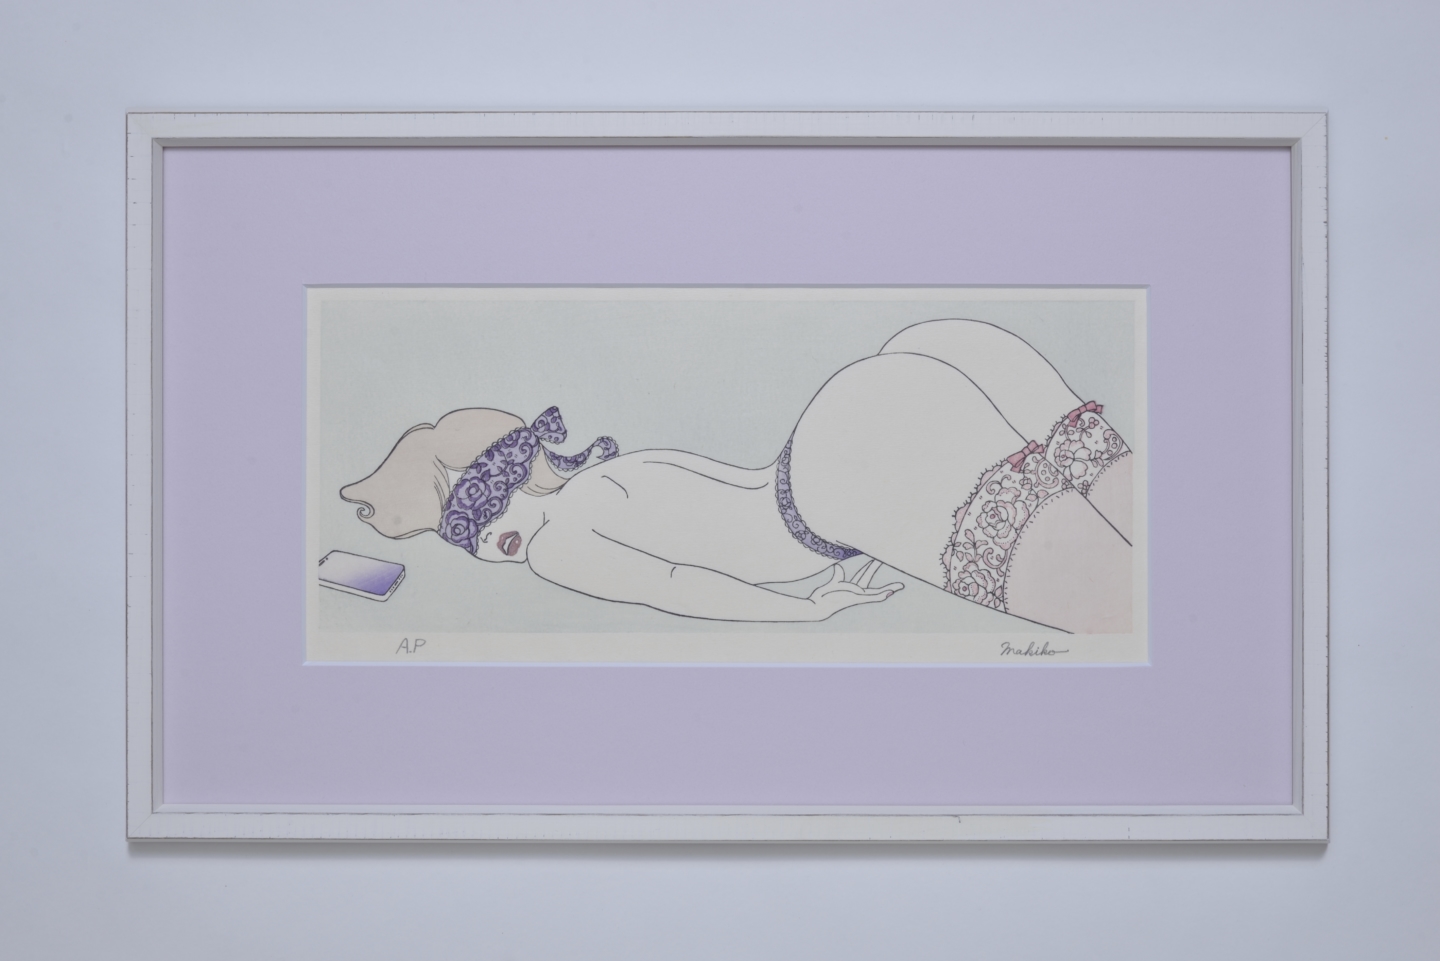 A timeless eroticism created by old and new shunga woodblock prints